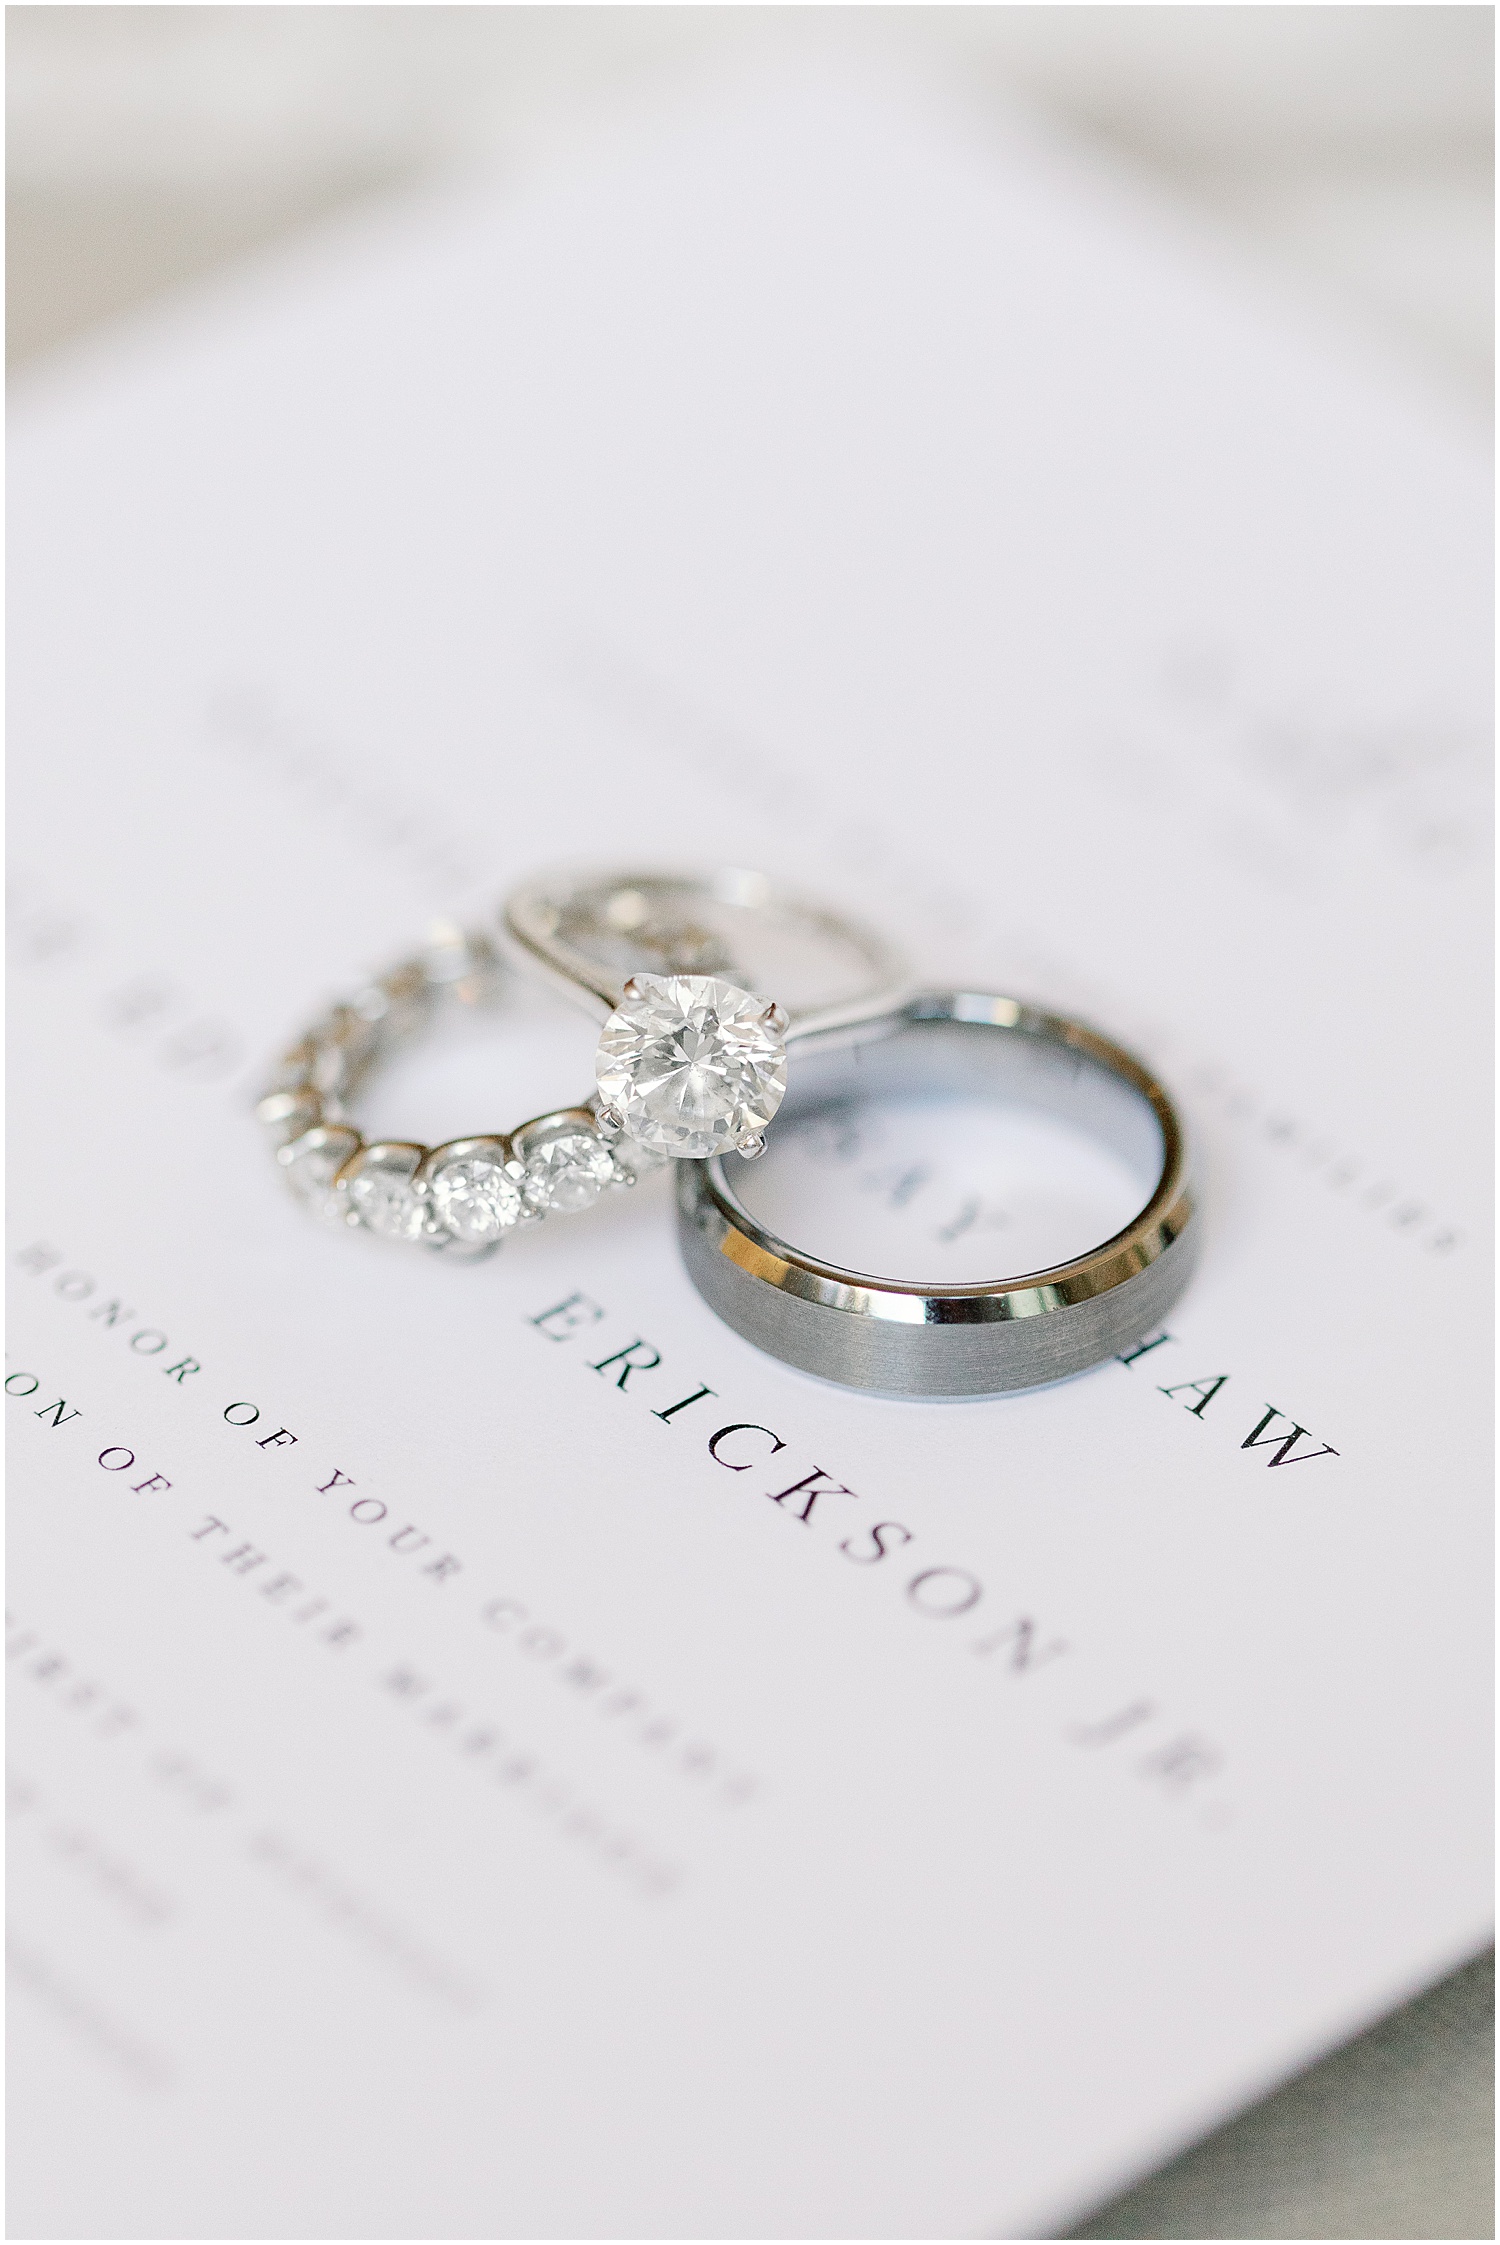 Wedding bands and Minted invitations